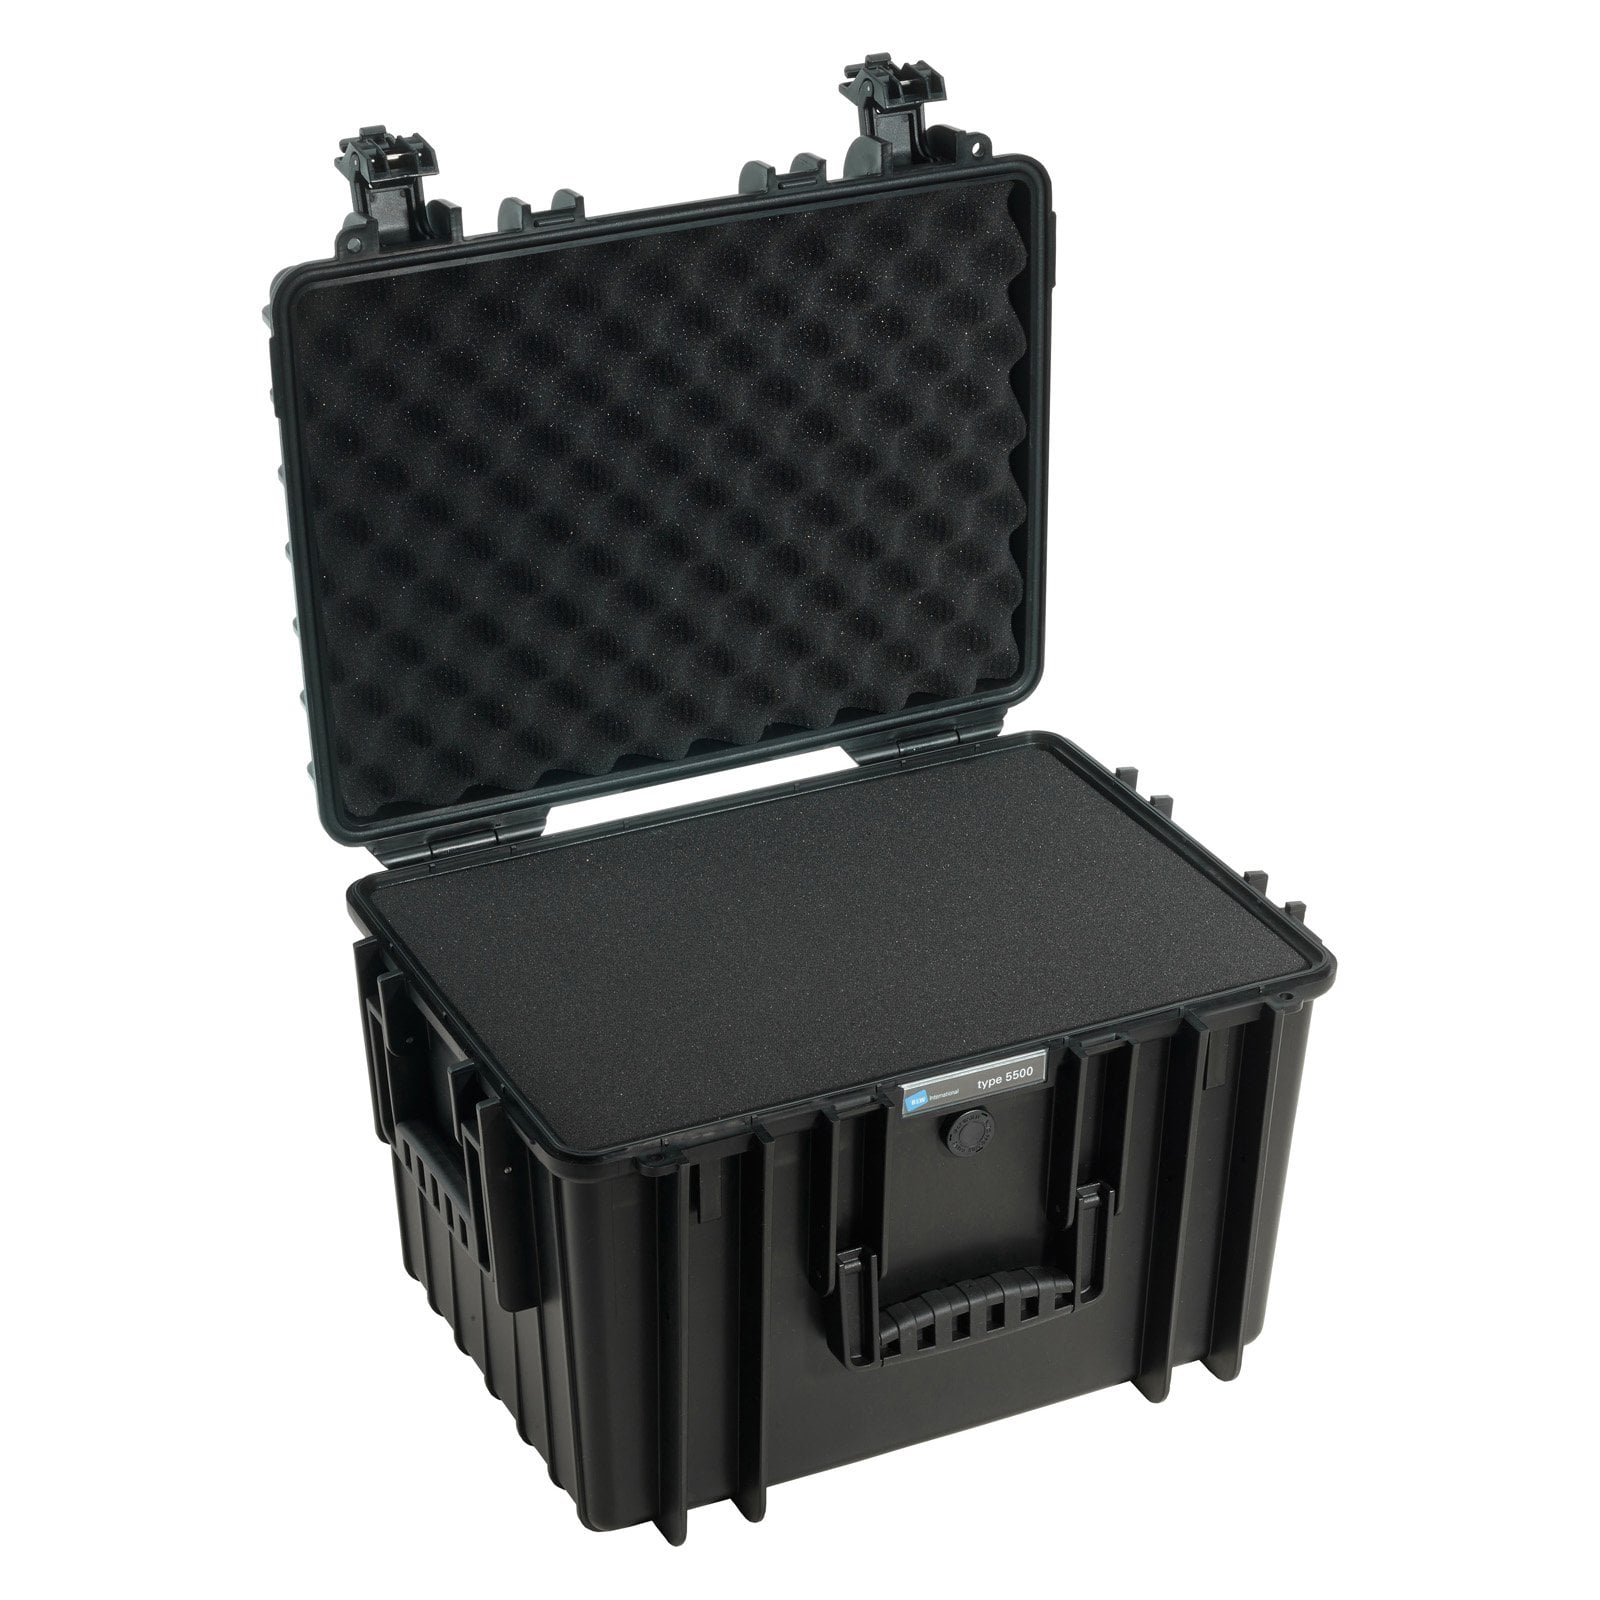 B&w International 117.16-l Jet 3000 Outdoor Tool Case With Tool Boards